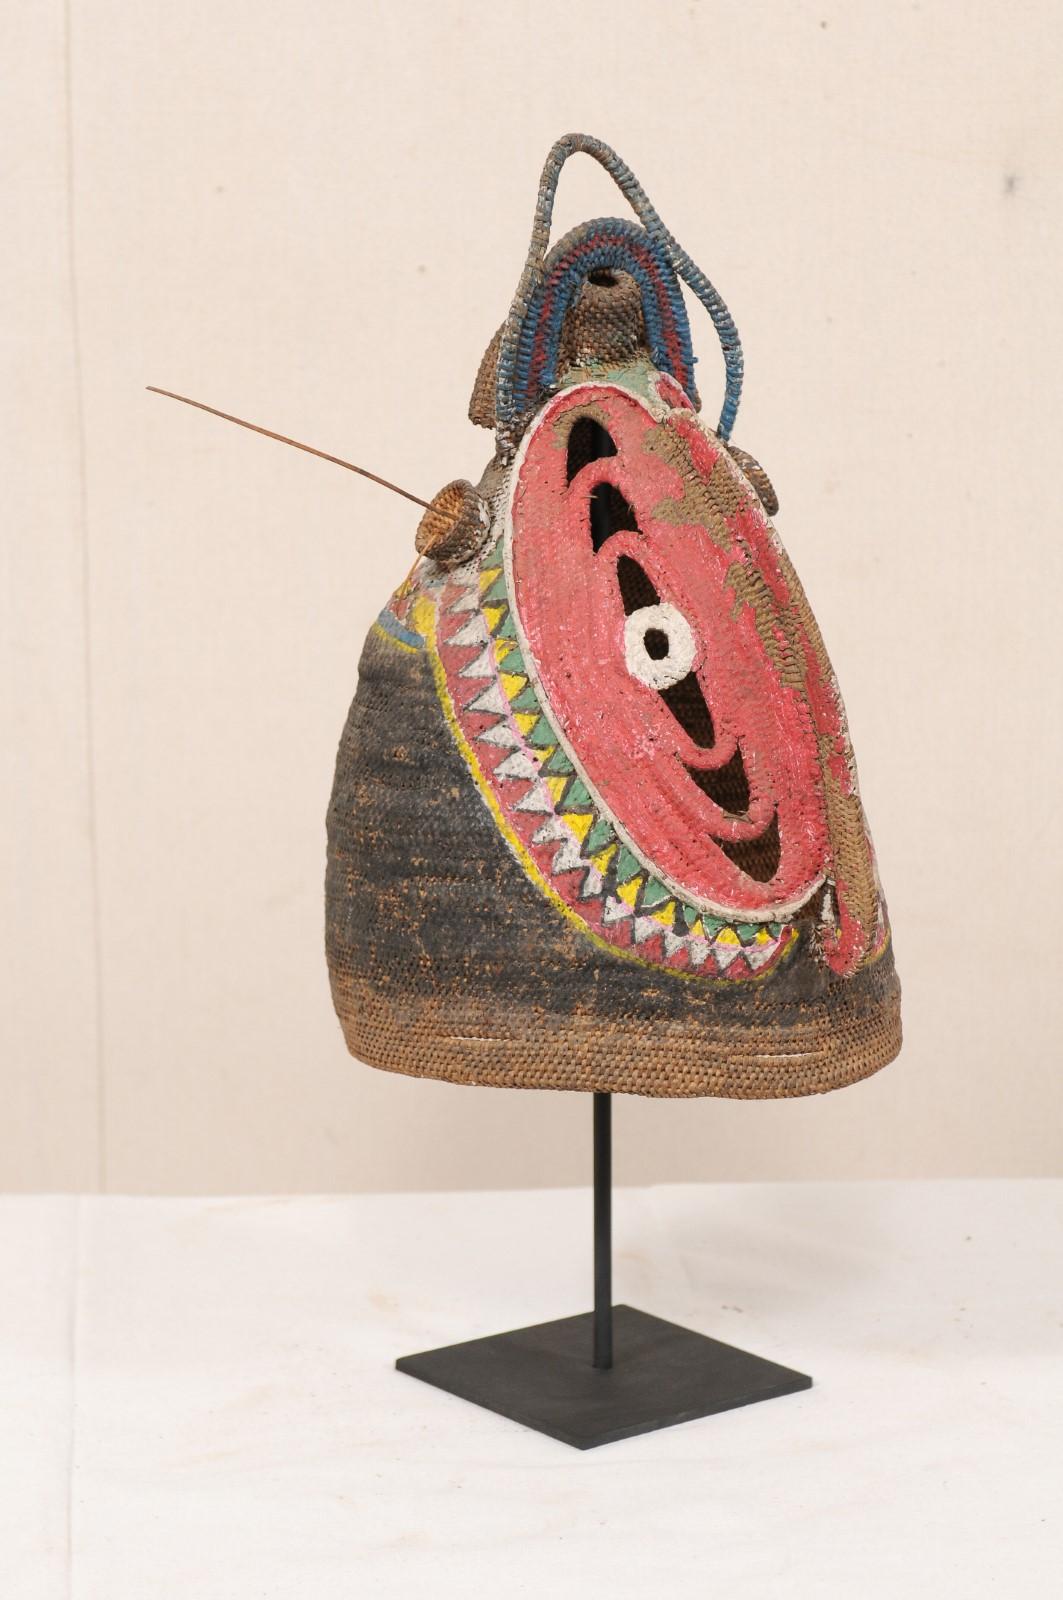 Papua New Guinean Vibrantly Colored Baba Festival Mask on Stand from Papua New Guinea